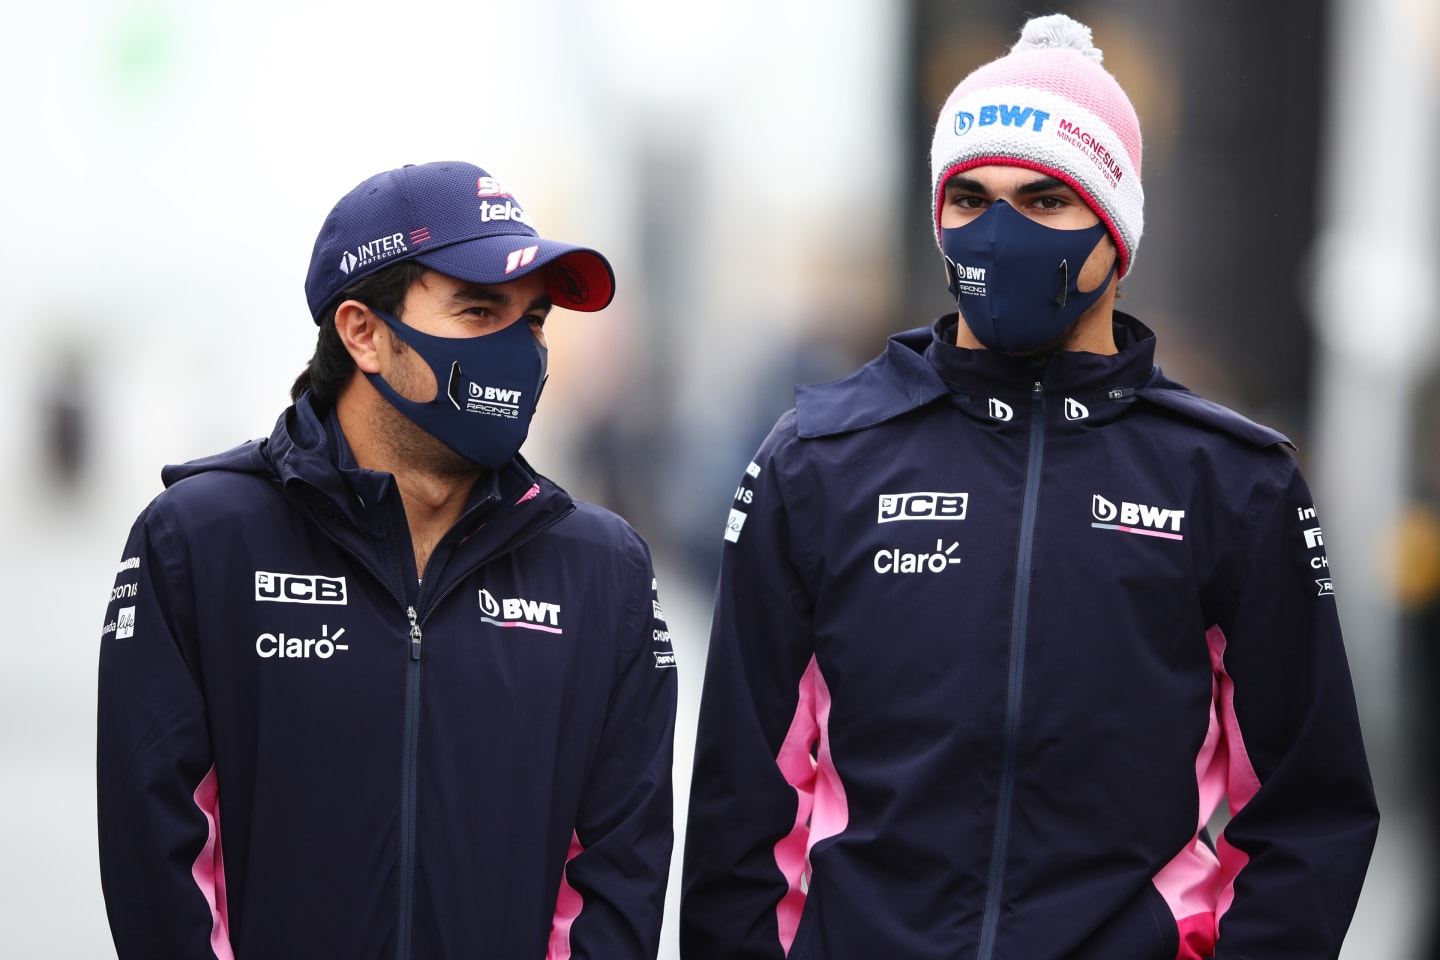 NUERBURG, GERMANY - OCTOBER 08: Sergio Perez of Mexico and Racing Point and Nicholas Latifi of Canada and Williams walk in the Paddock during previews ahead of the F1 Eifel Grand Prix at Nuerburgring on October 08, 2020 in Nuerburg, Germany. (Photo by Mark Thompson/Getty Images)